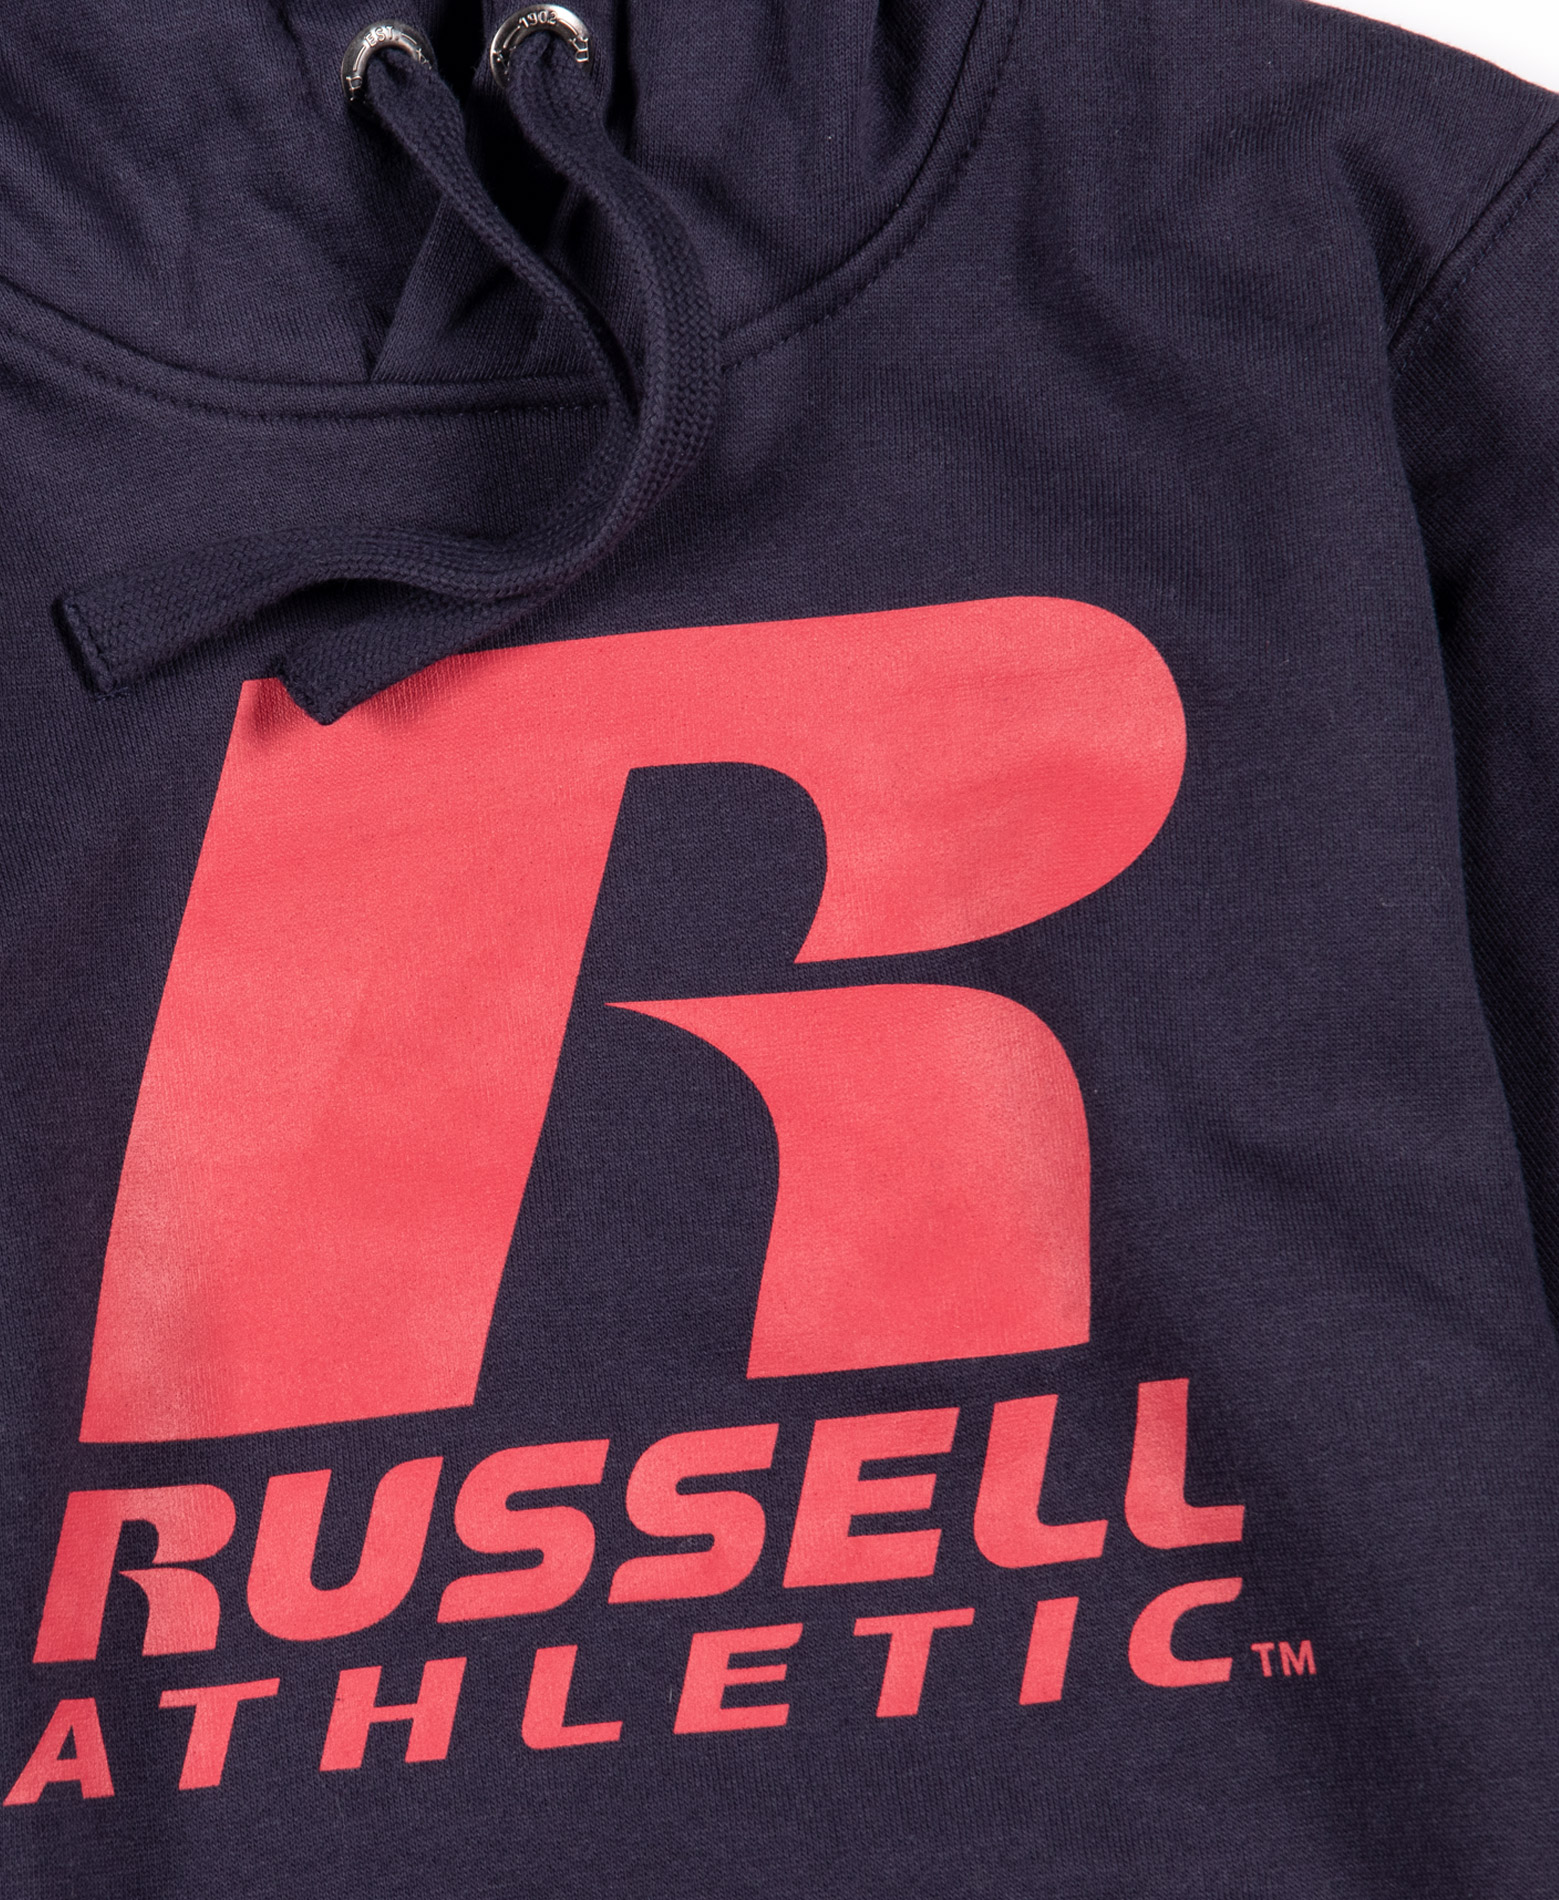 Russell Athletic A9-904-2-190 Μπλε